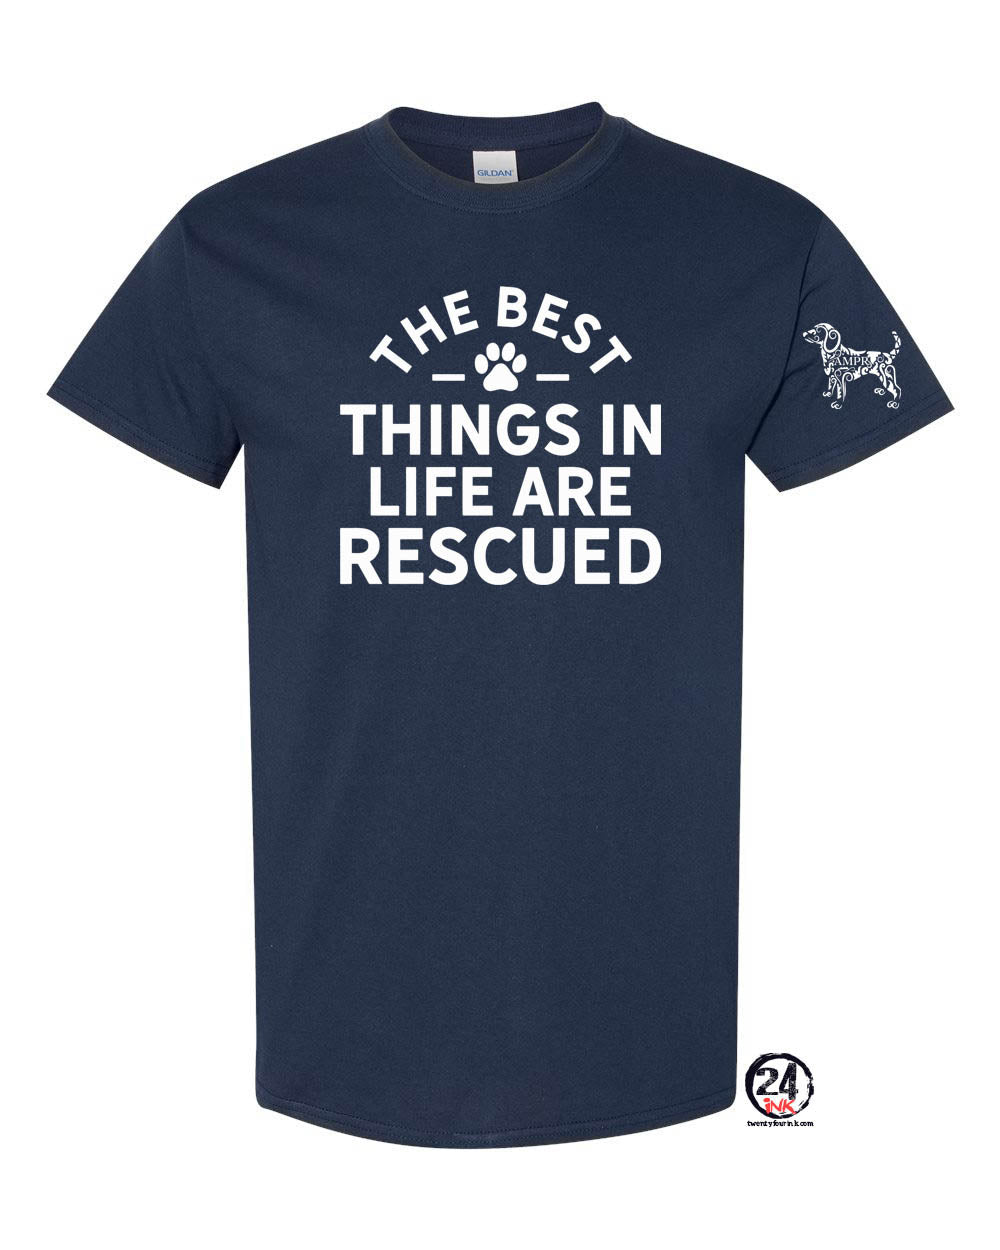 The best things in life are rescued t-Shirt